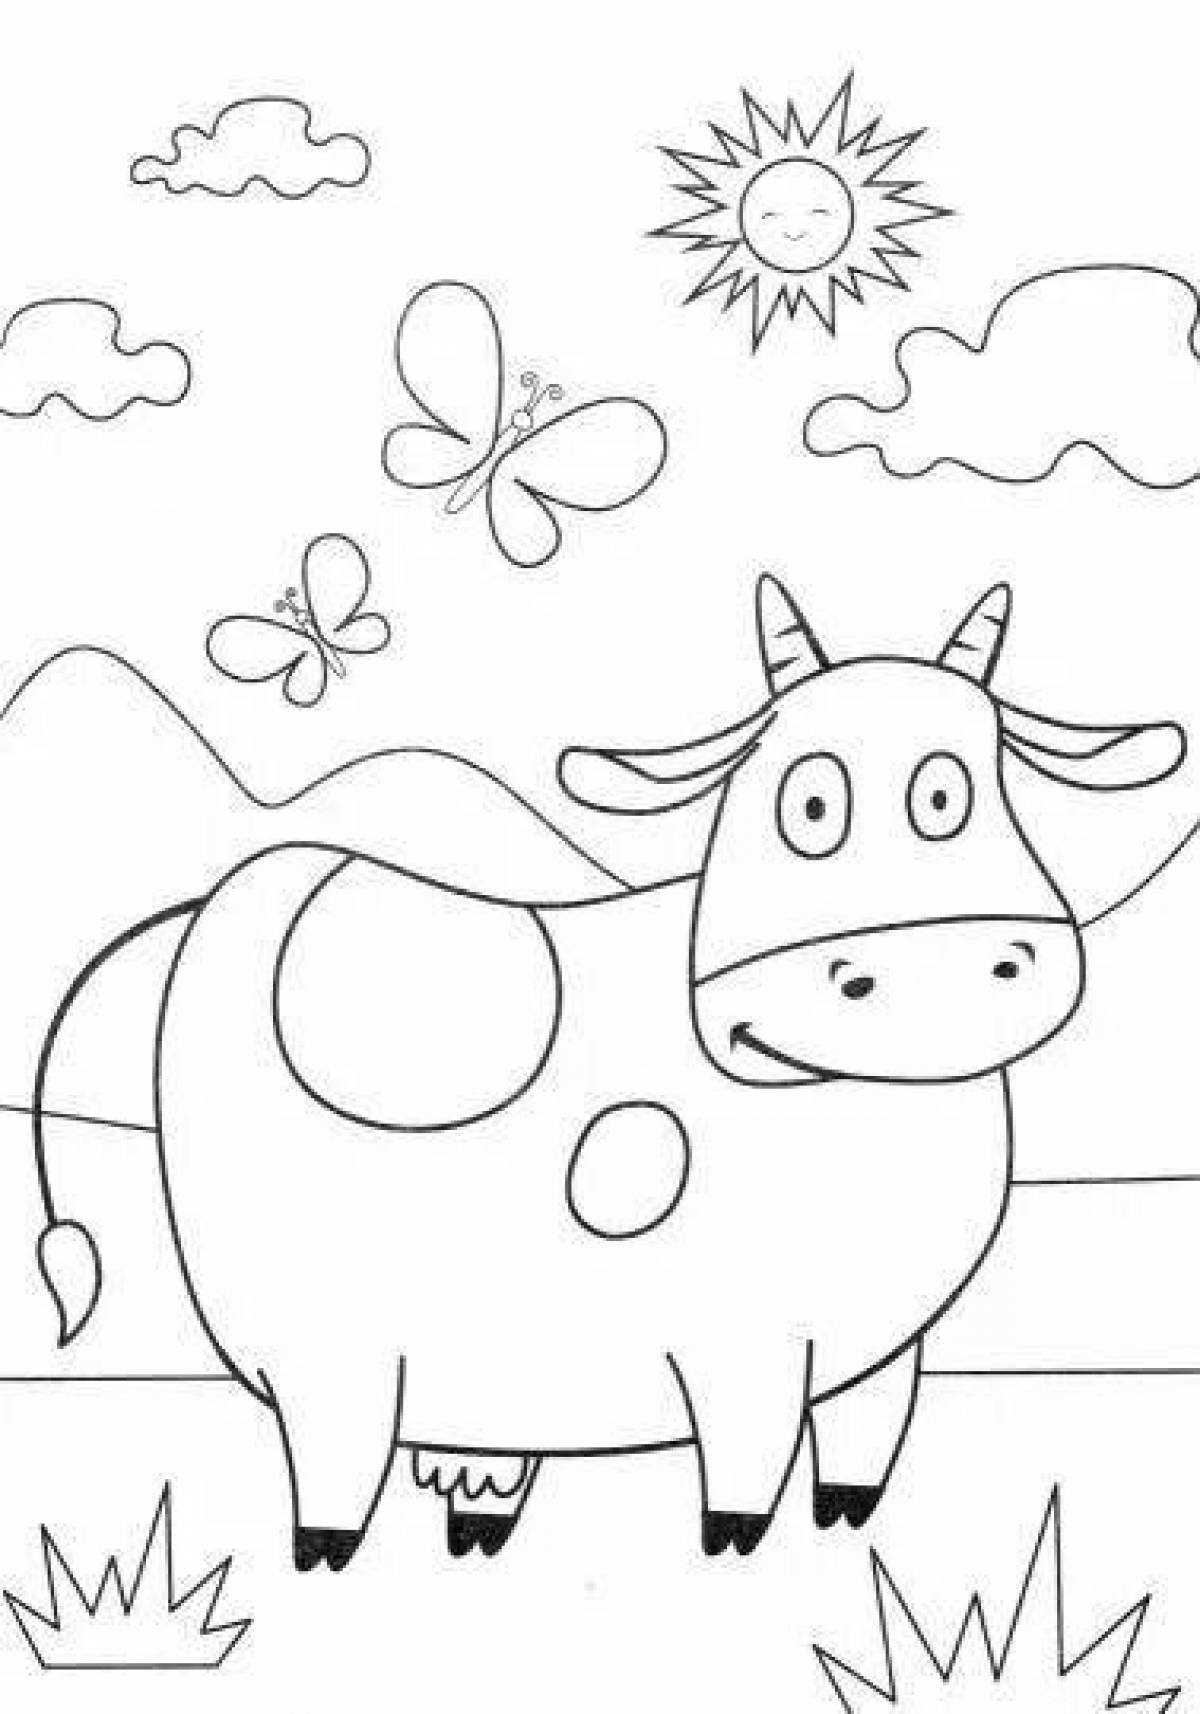 Cow playful coloring page